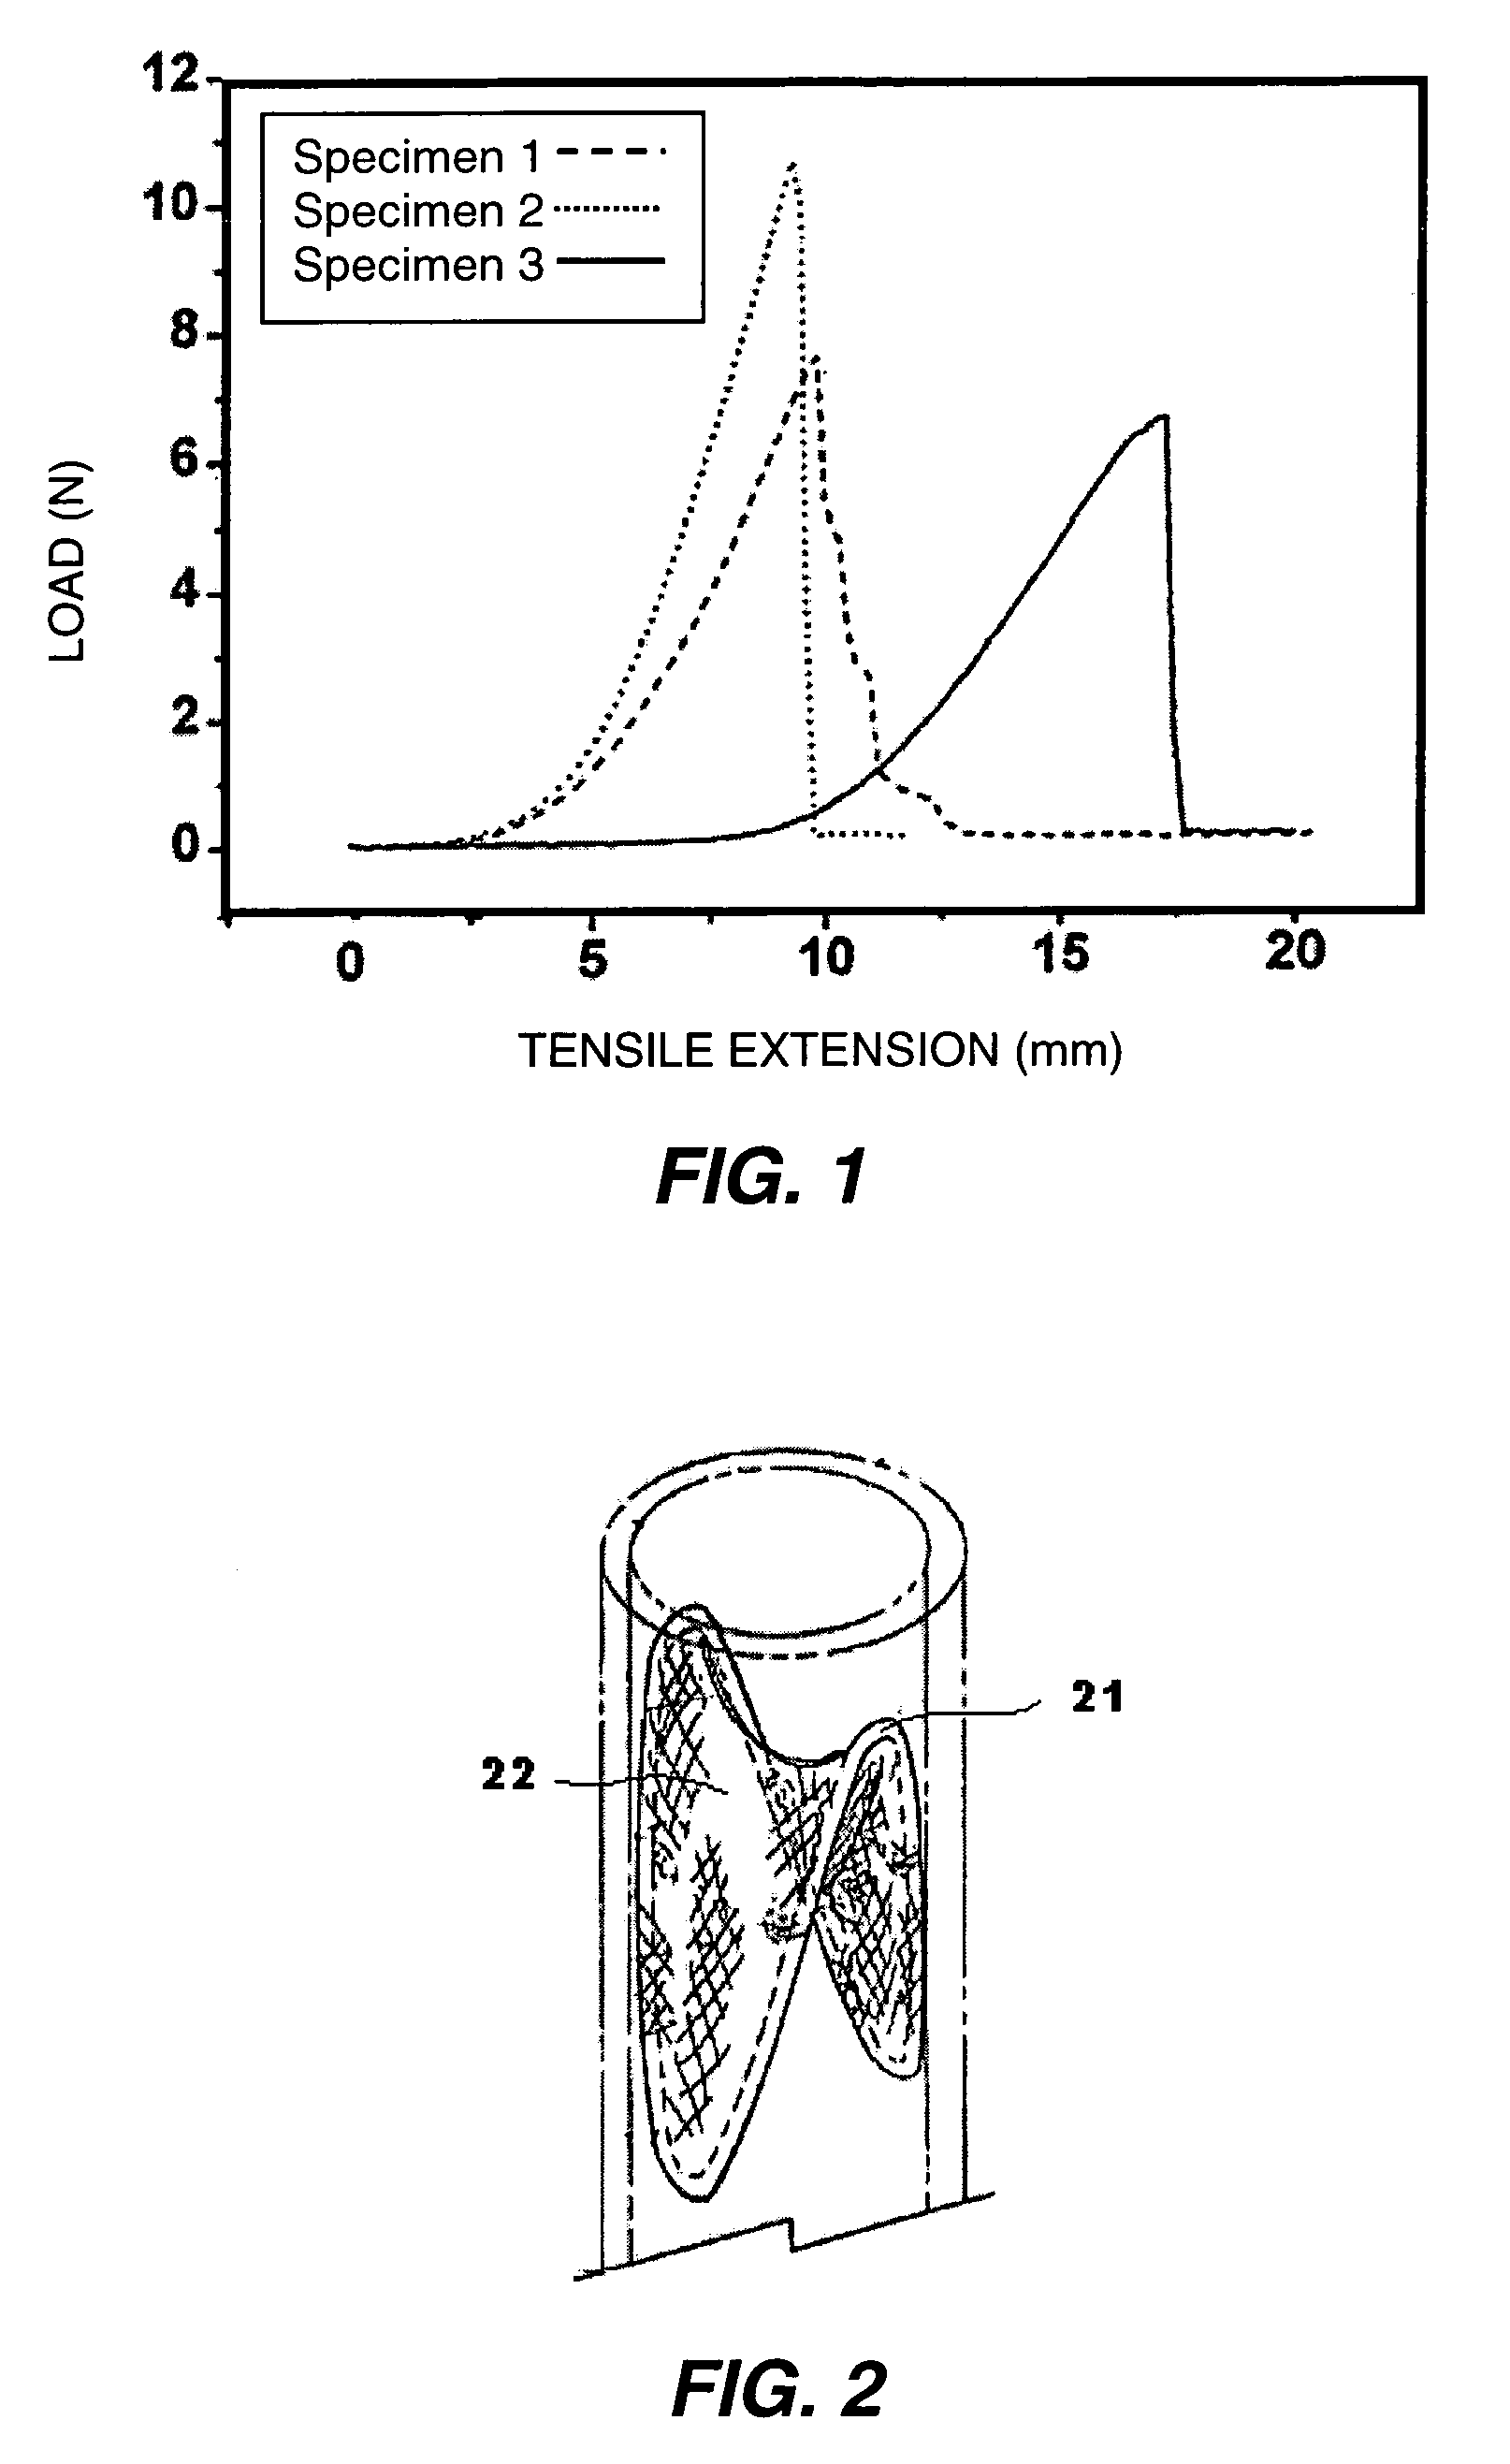 Graft prosthesis devices containing renal capsule collagen